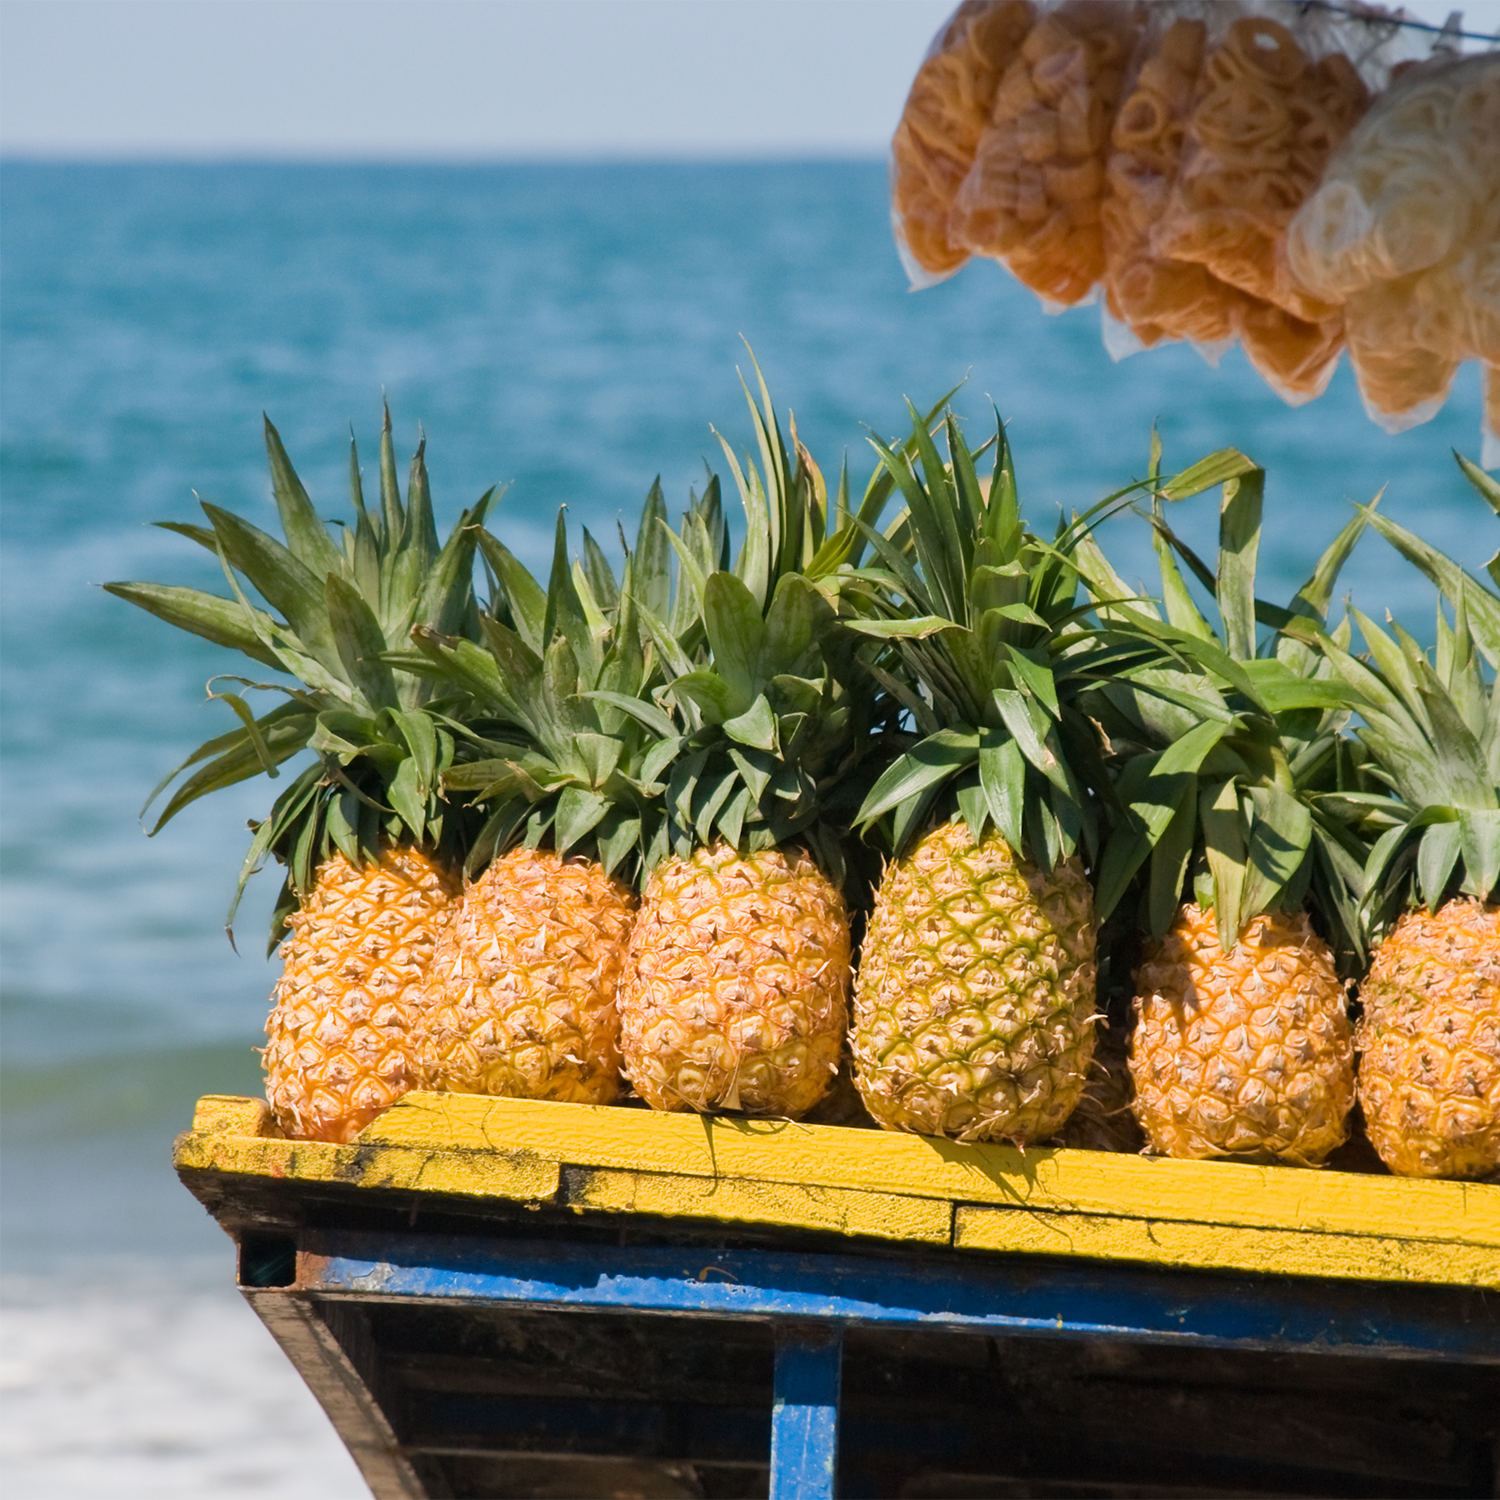 A fruit cart on a caribbean beach - inspiration for our "Caribbean Market" scented candle and wax melt bar